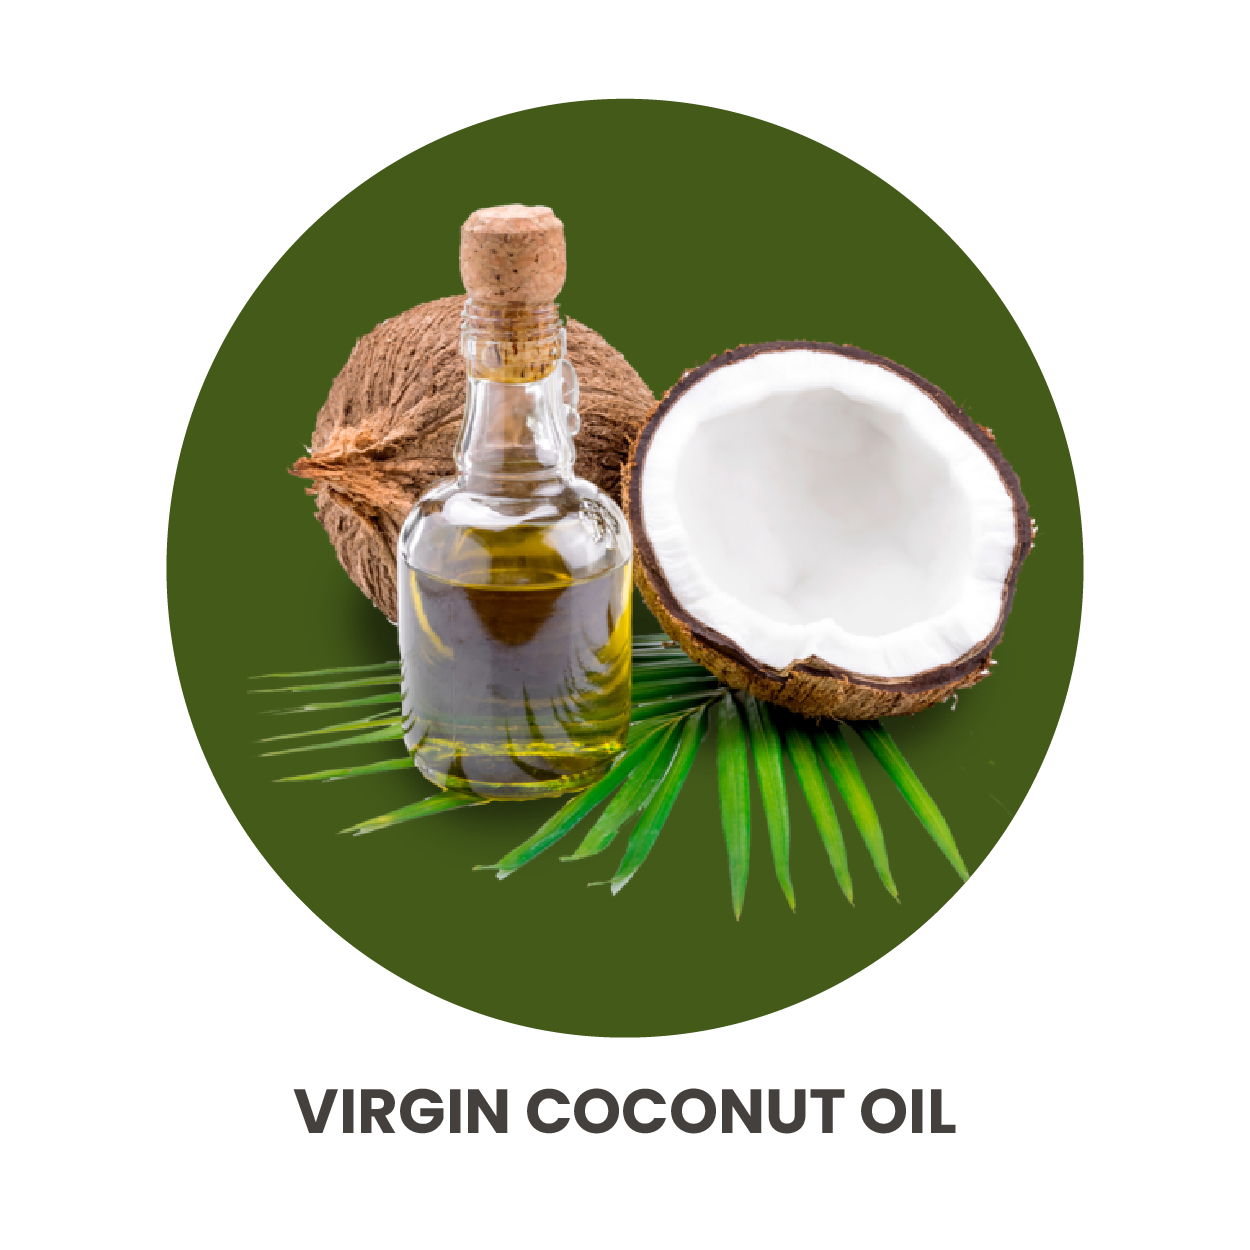 Made with-Virgin Coconut Oil - Image